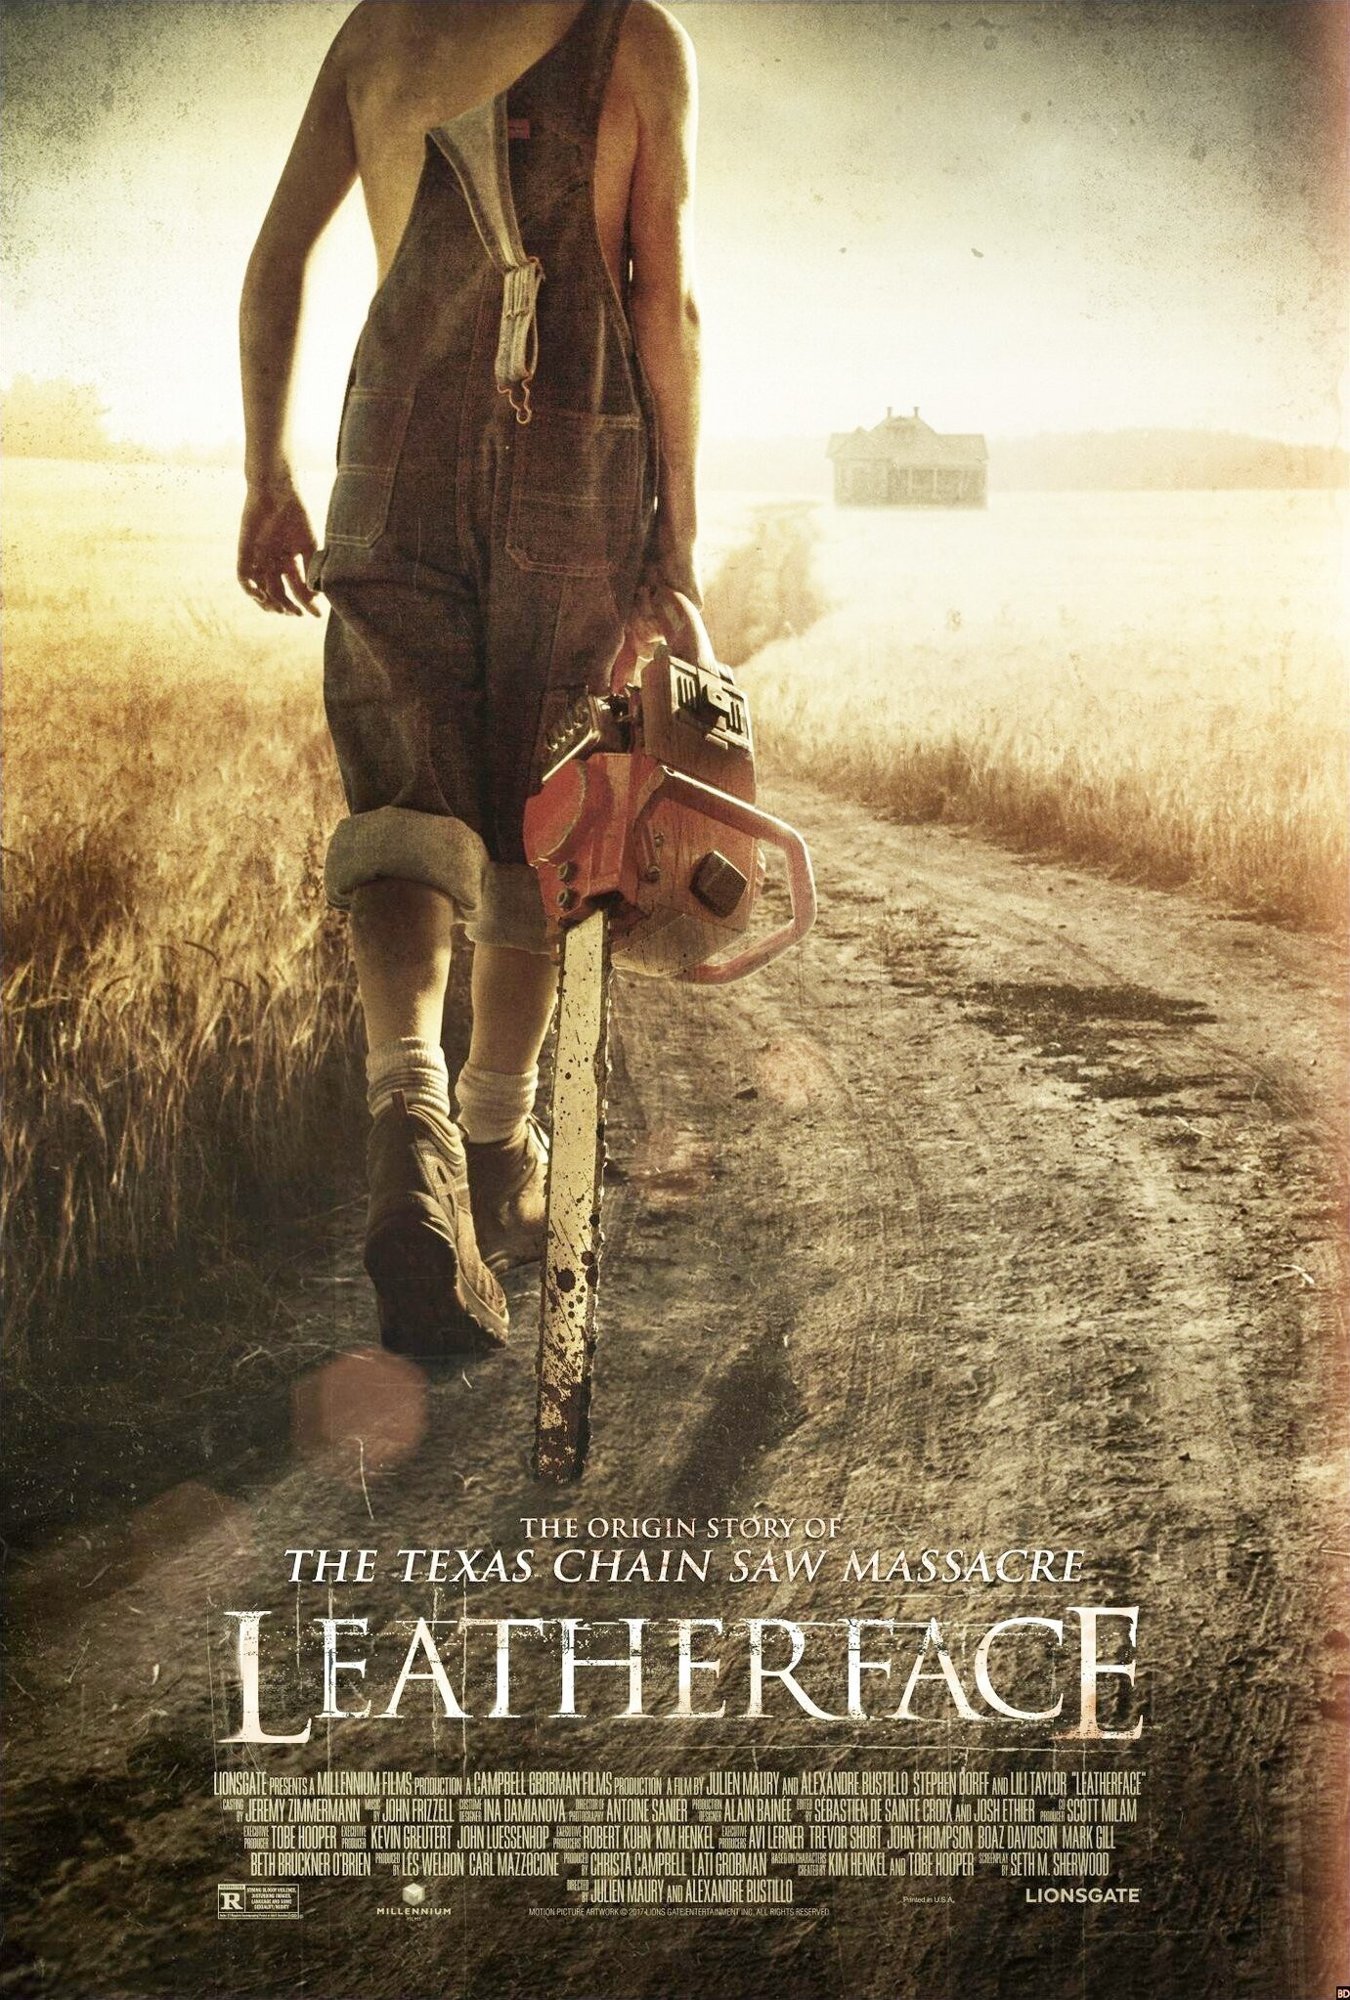 Leatherface (2017) Pictures, Photo, Image and Movie Stills